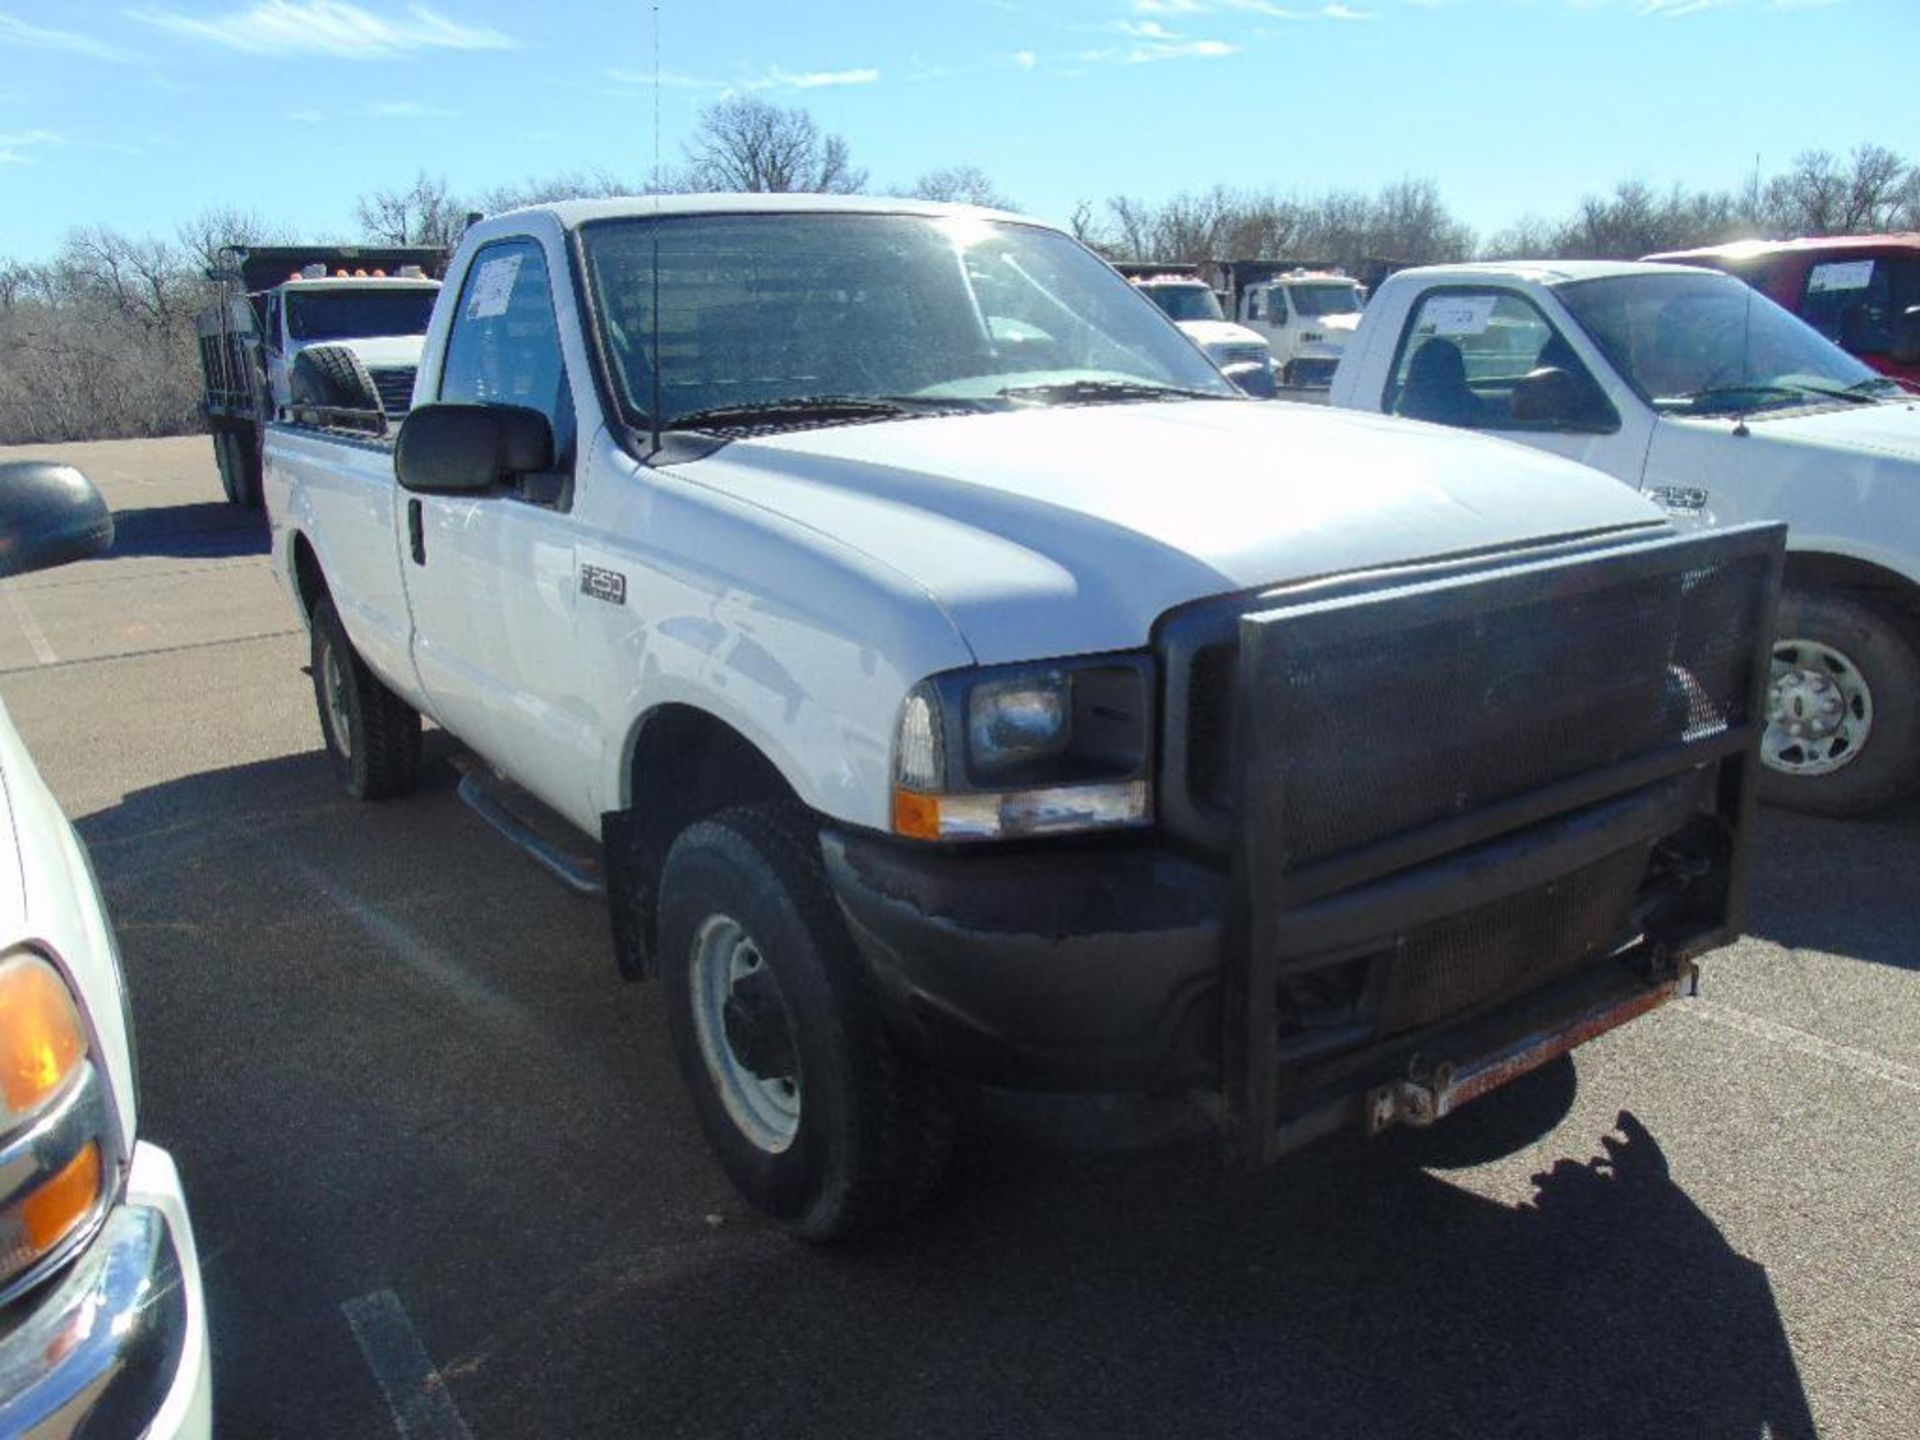 2003 Ford F250 4x4 Pickup s/n 1ftnf21l23ed85660,v8 gas eng, 5 spd trans, od reads 82224 miles, - Image 3 of 3